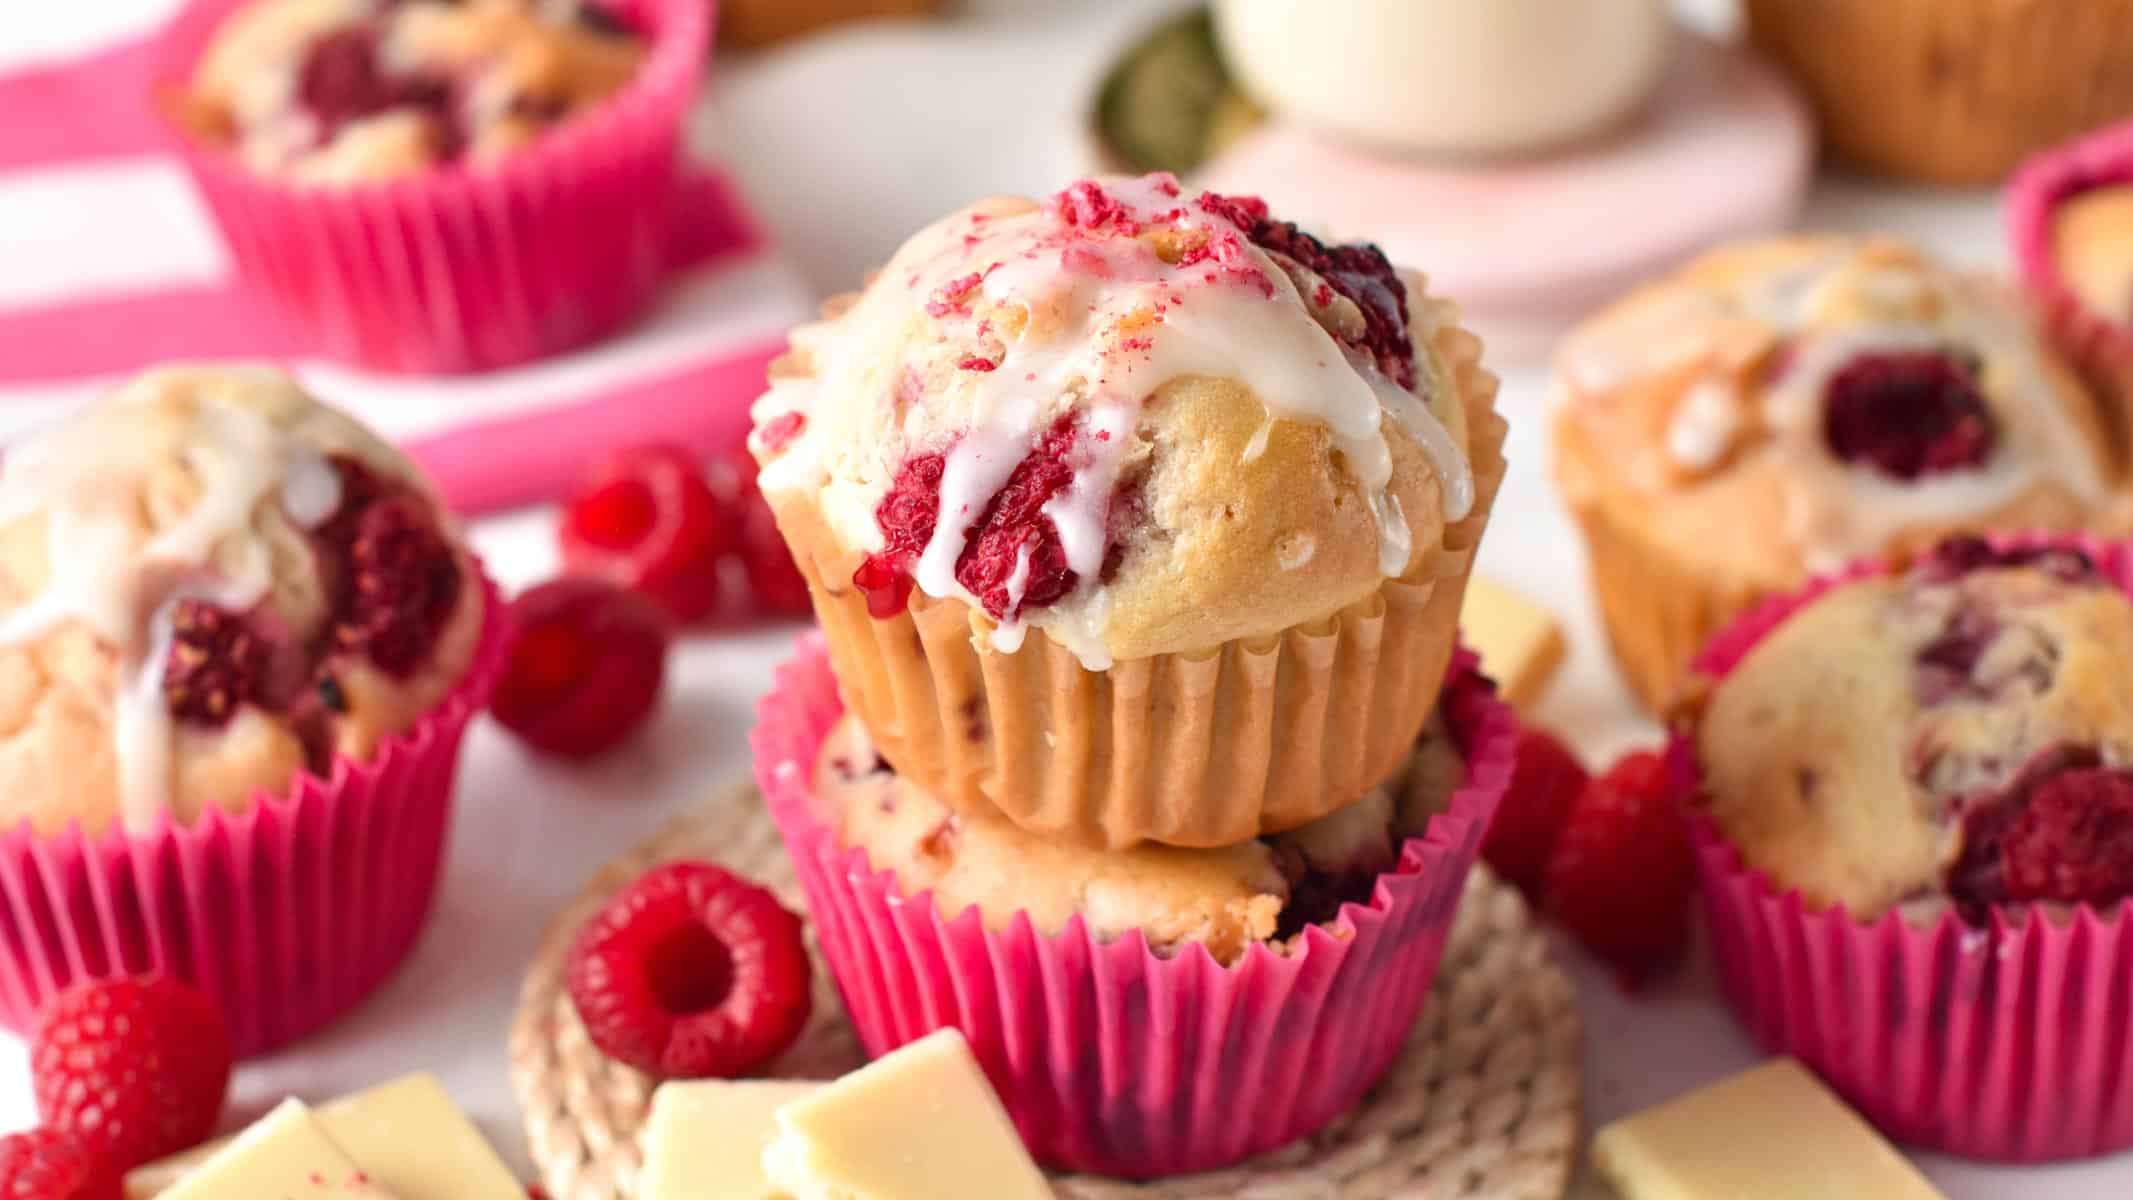 These Raspberry White Chocolate Muffins are moist vanilla muffins filled with delicious white chocolate bits and juicy raspberries. They are delicious breakfast muffins or a sweet treat in the afternoon.